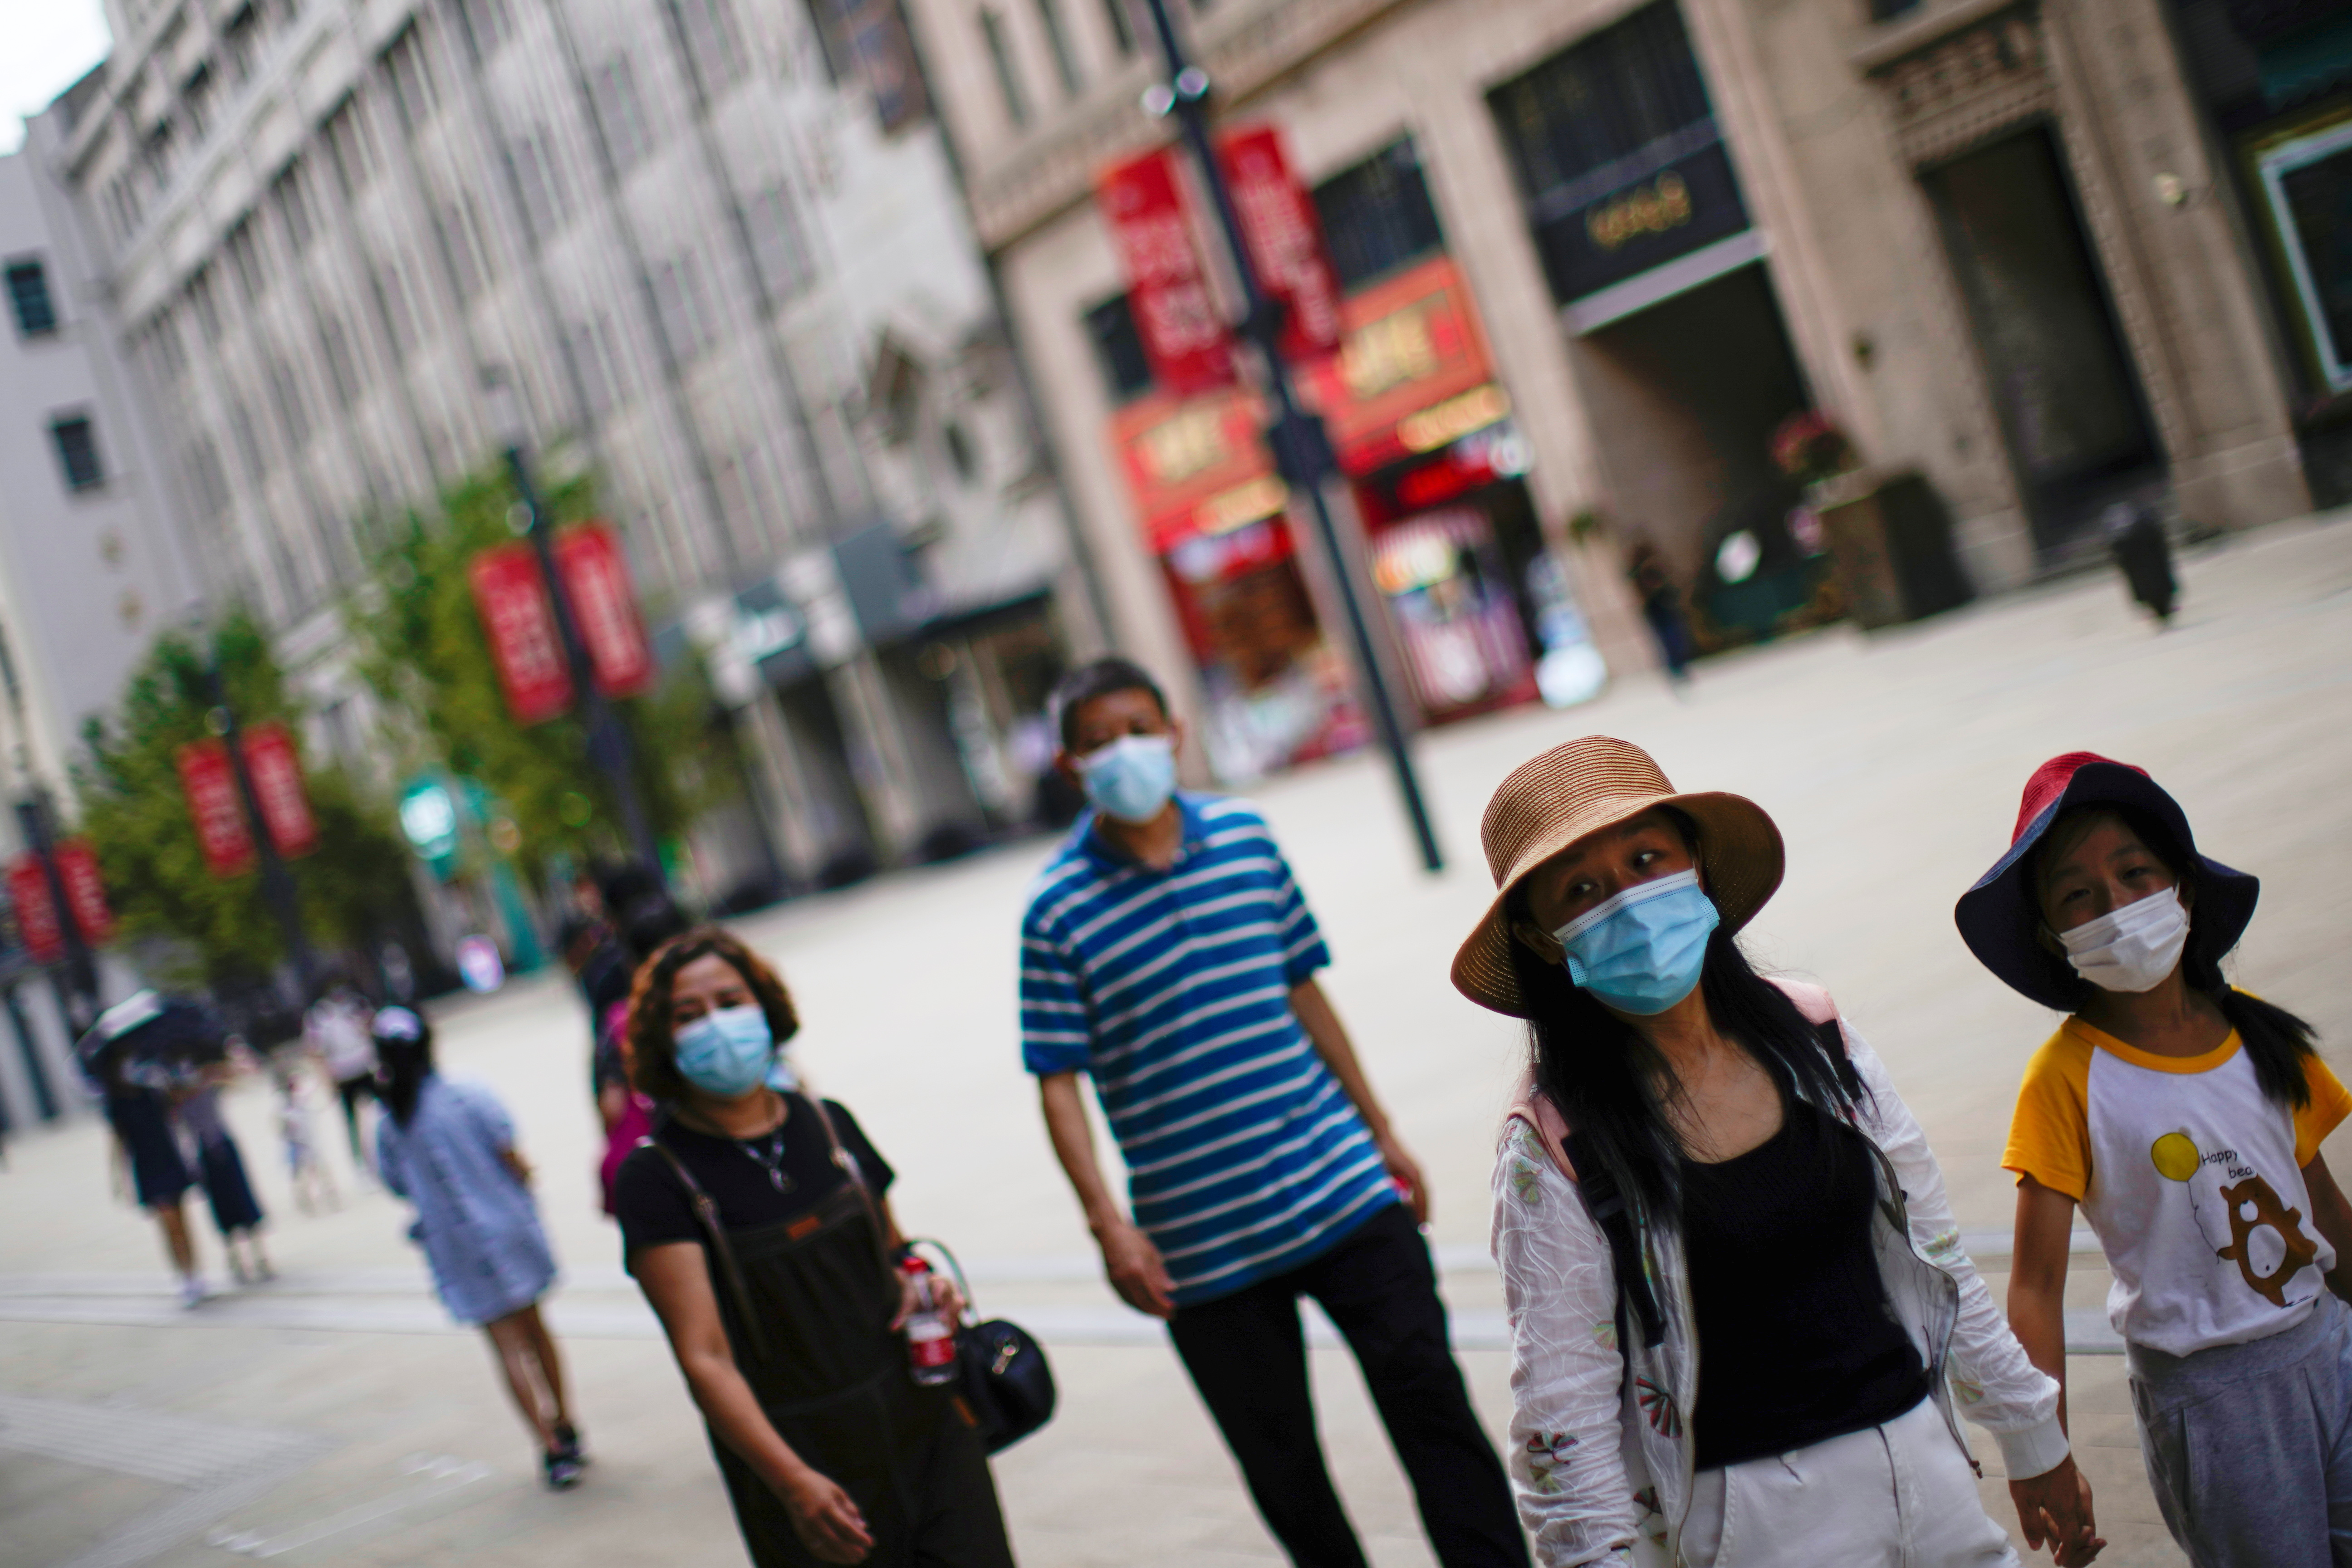 People wearing protective face masks walk on a street, following new cases of the coronavirus disease (COVID-19), in Shanghai, China August 25, 2021. REUTERS/Aly Song